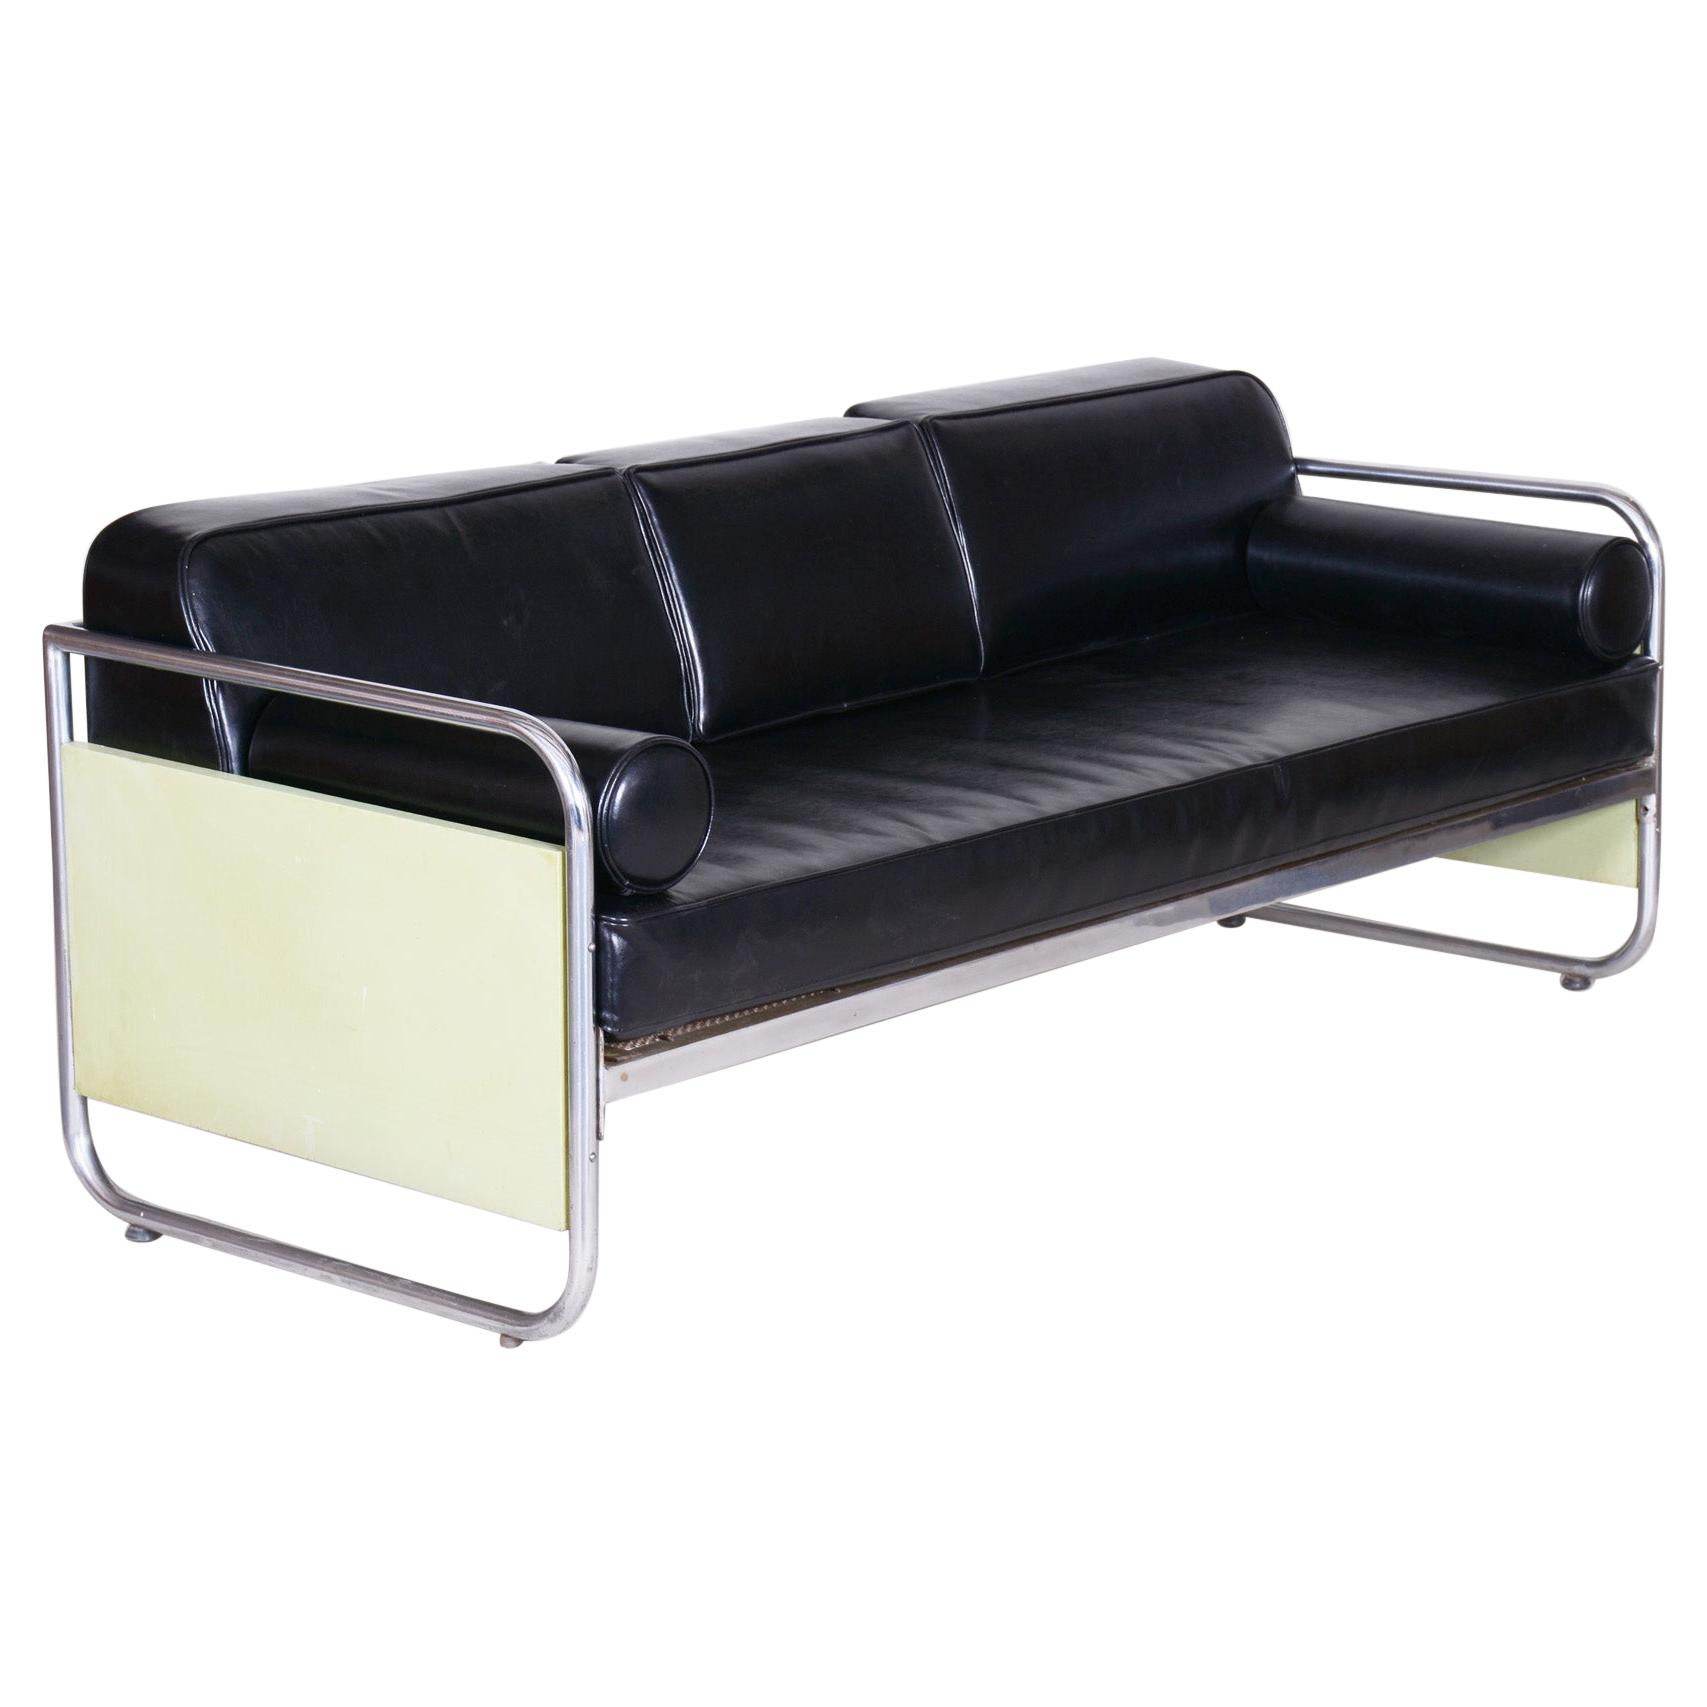 Fully Restored Bauhaus Leather and Chrome Sofa by Vichr a Spol, 1930s Czechia